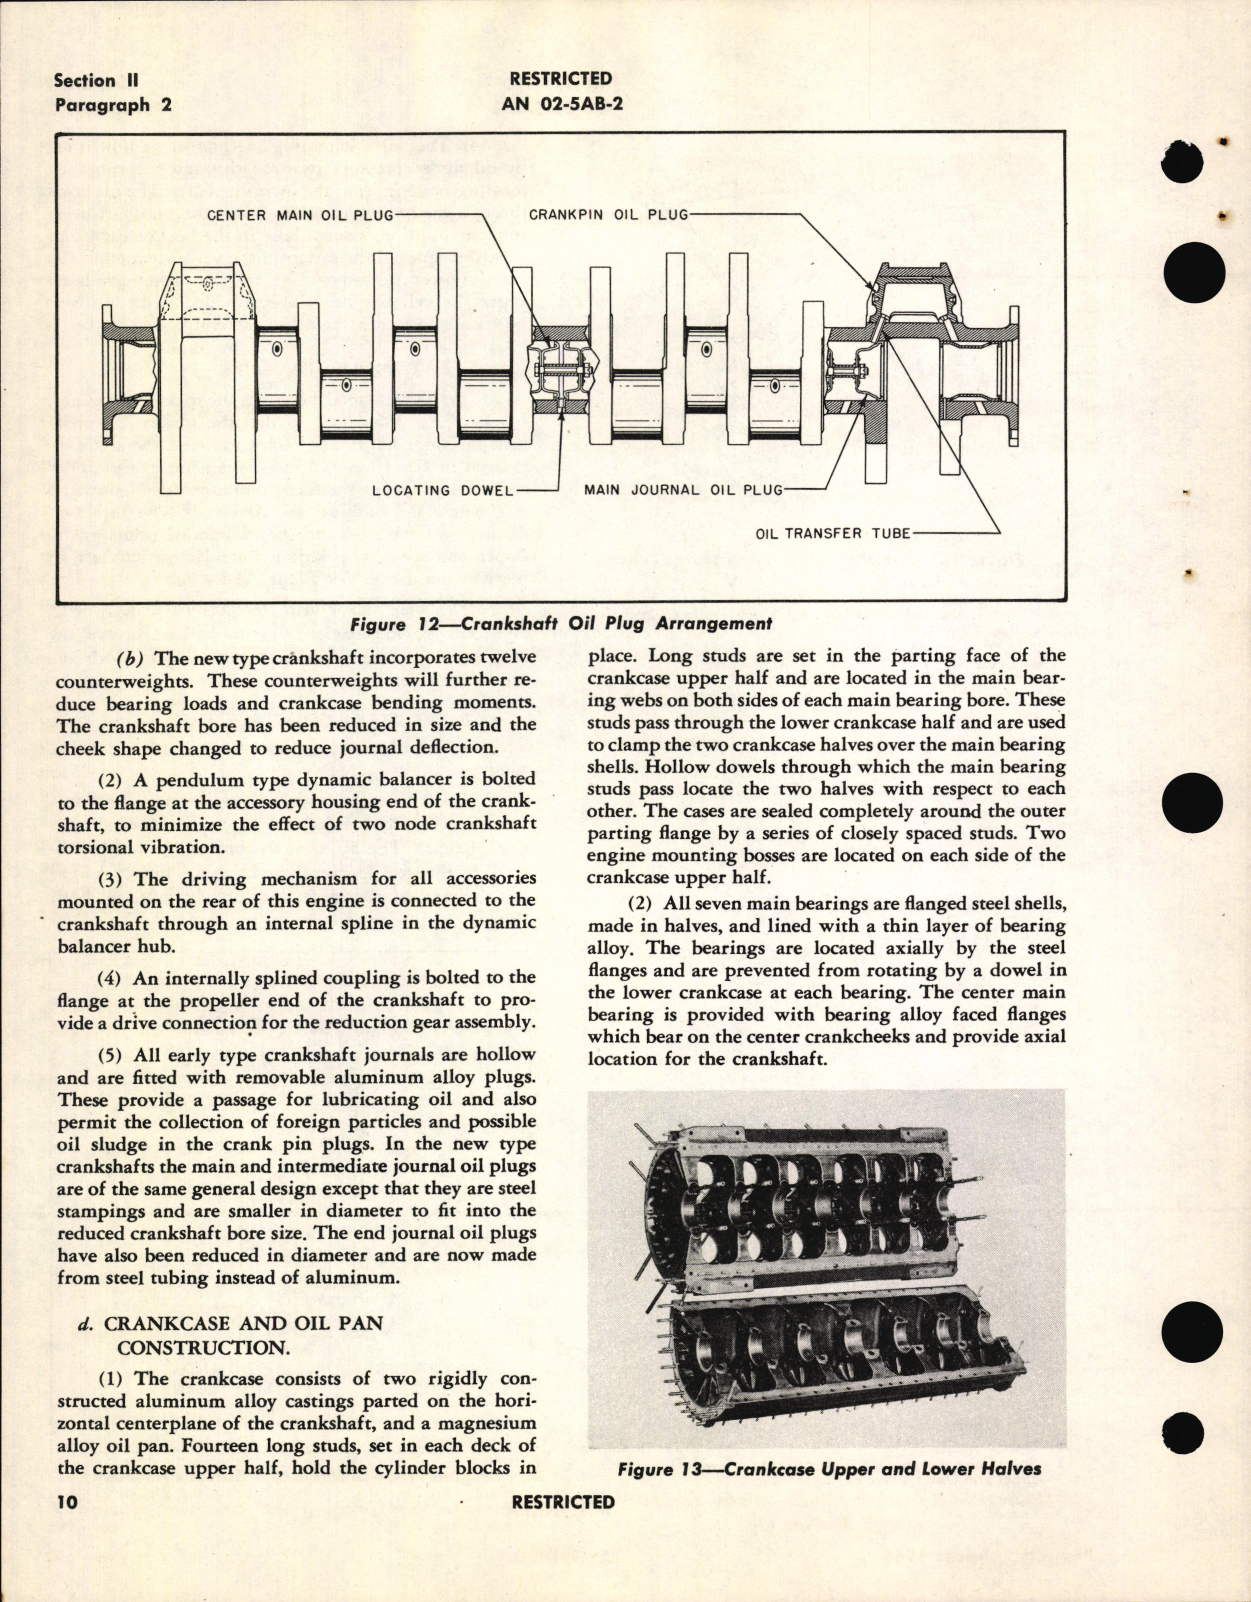 Sample page 20 from AirCorps Library document: Service Instructions for V-1710-27 thru -115 Aircraft Engines